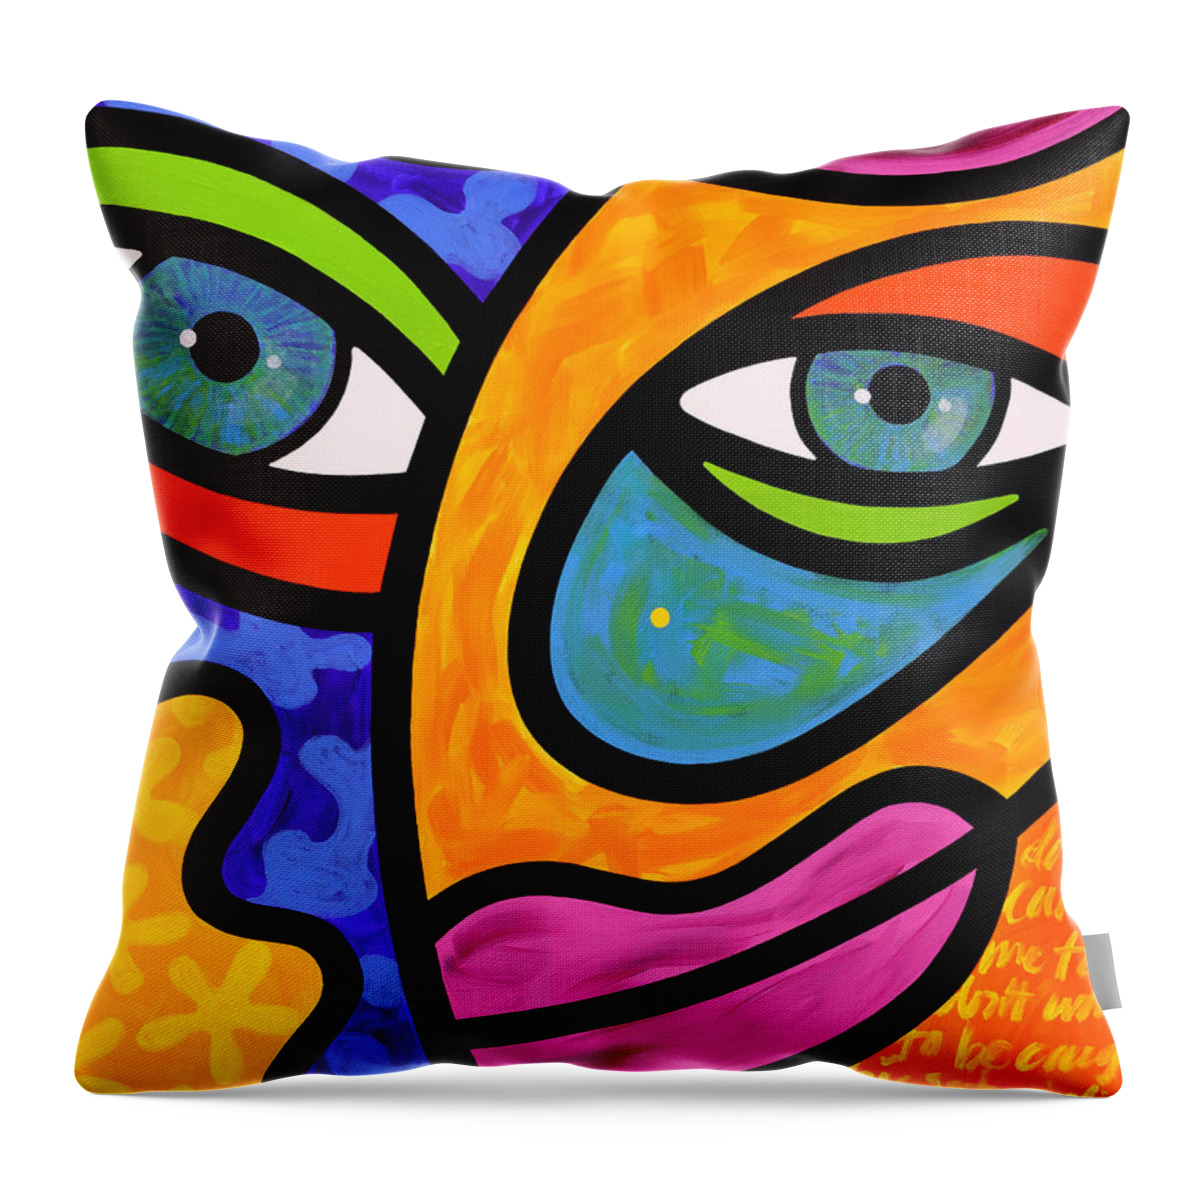 Eyes Throw Pillow featuring the painting Penelope Peeples by Steven Scott